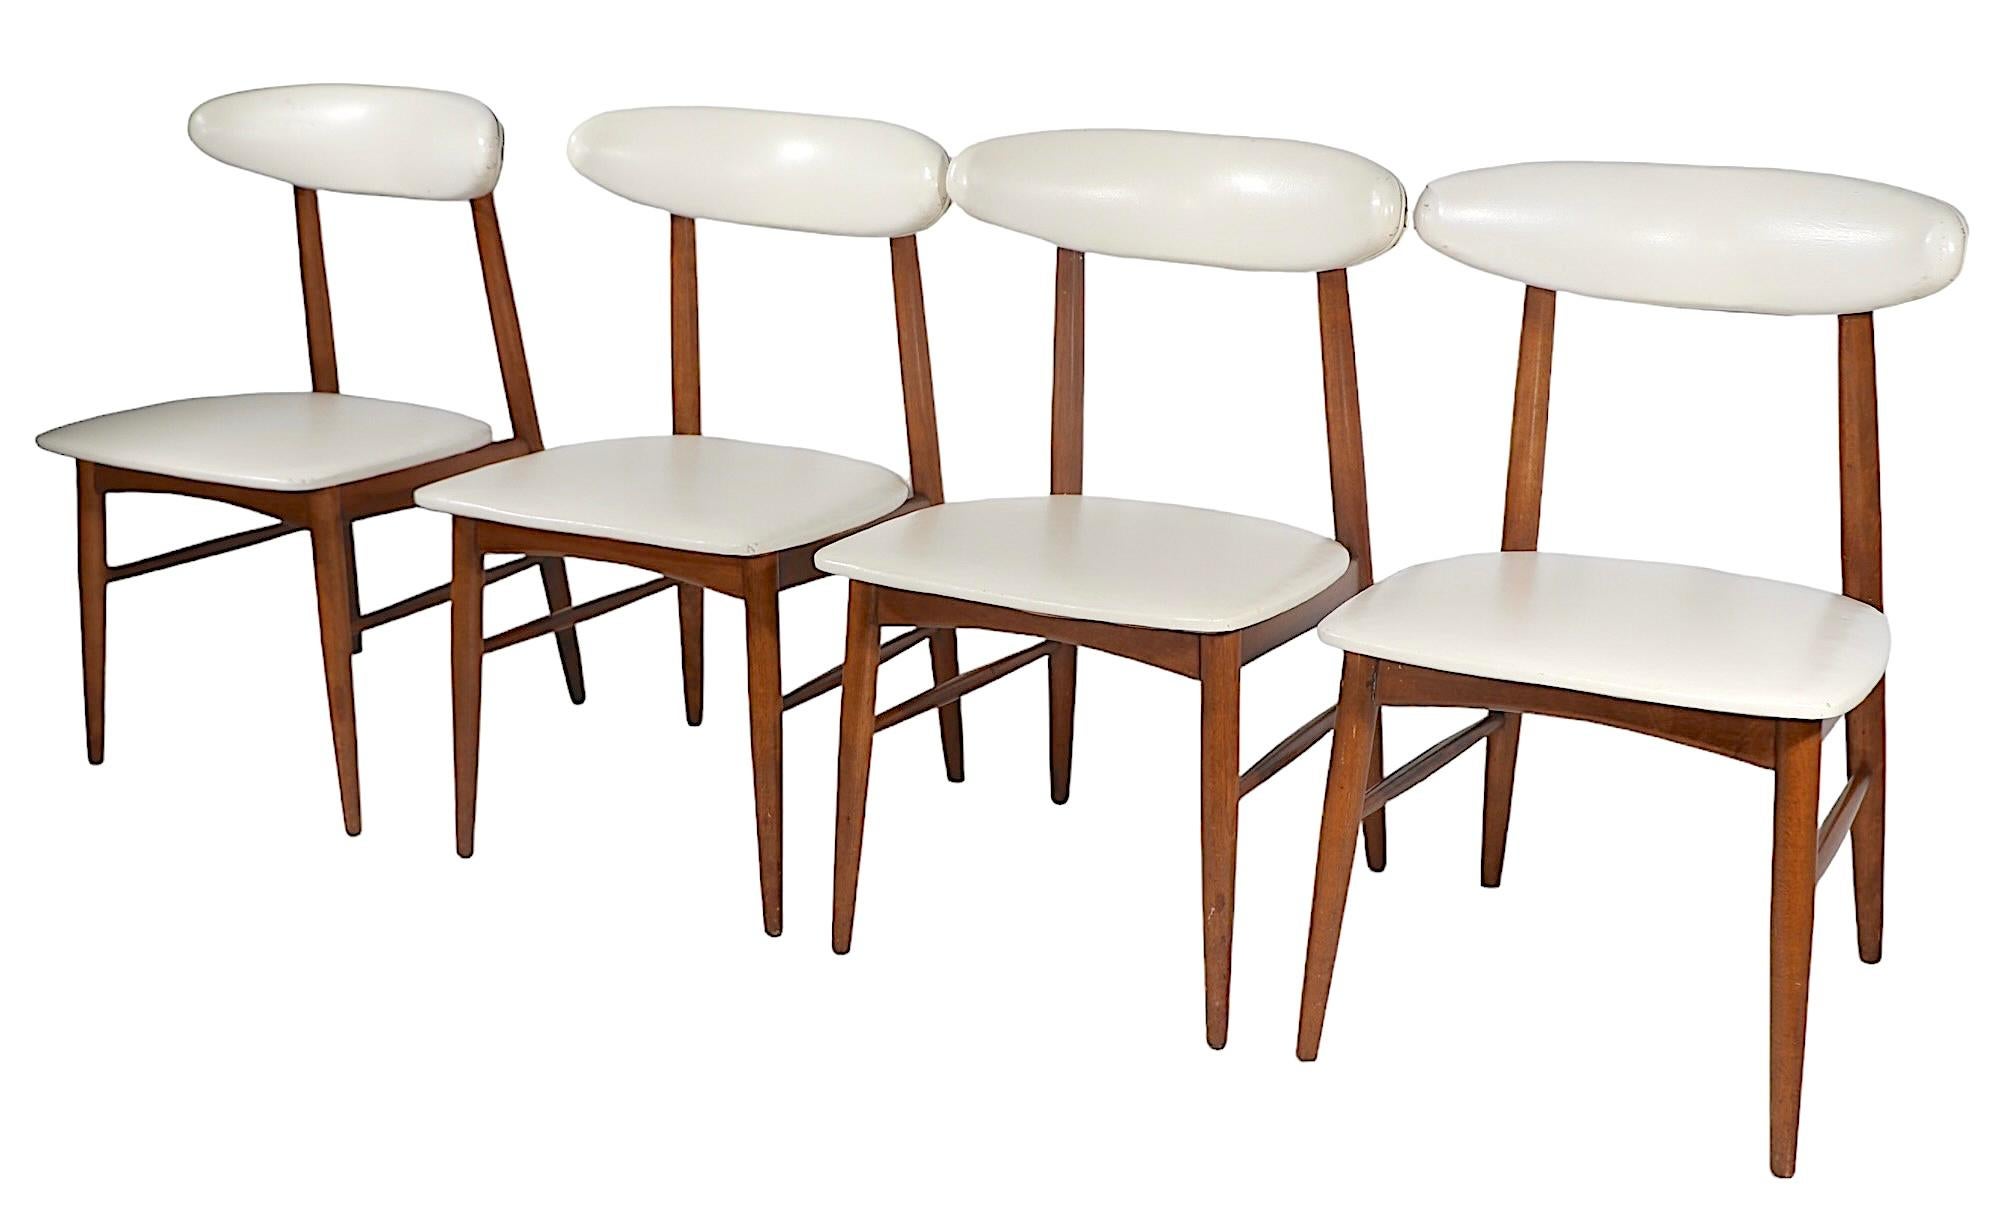 5 pc Mid Century Dinette Set by Viko Baumritter c 1950’s For Sale 5